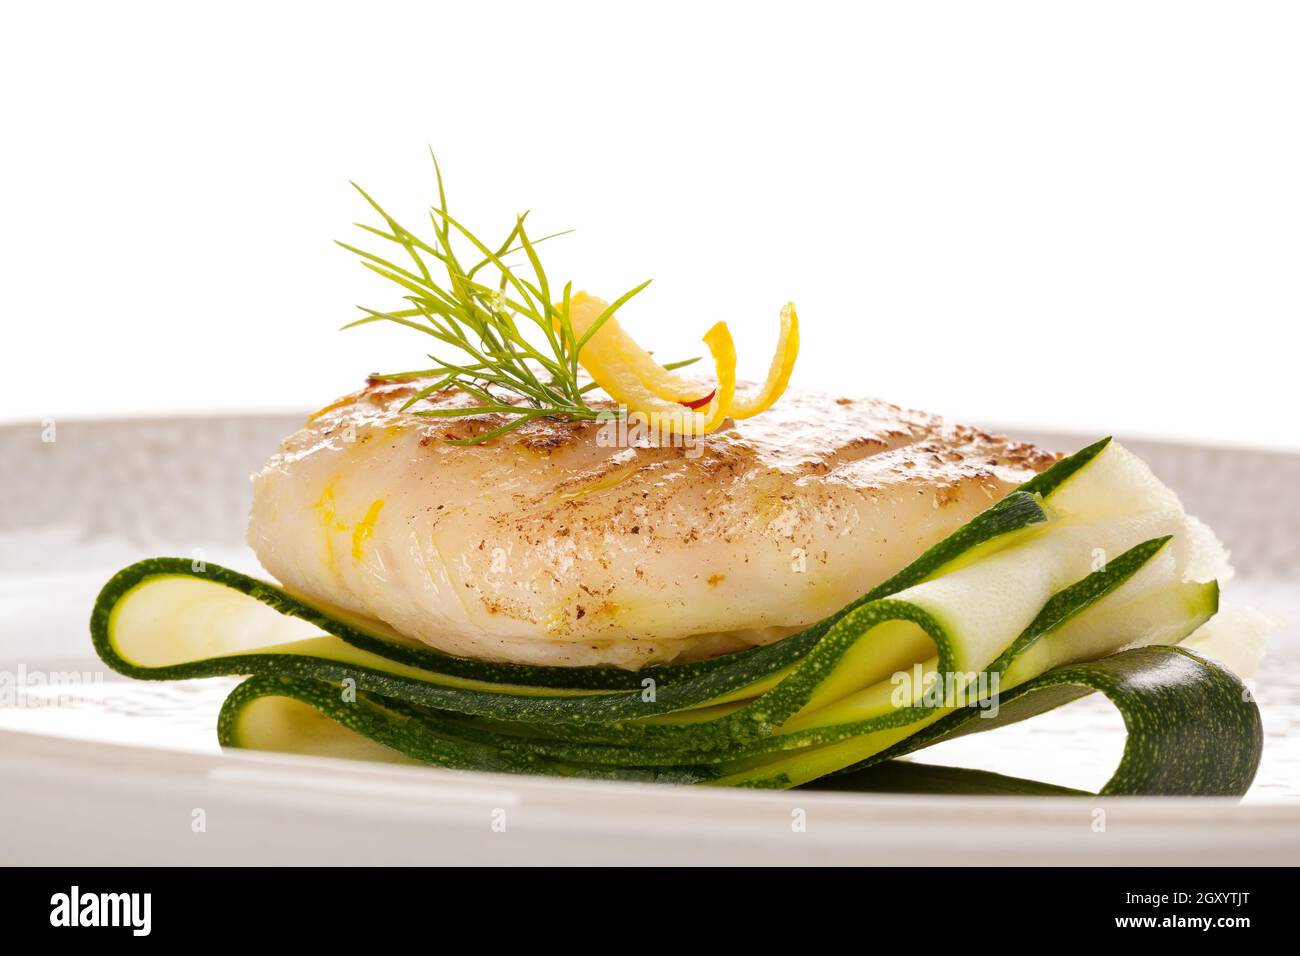 Delicious fish fillet with vegetable. Healthy eating. Stock Photo